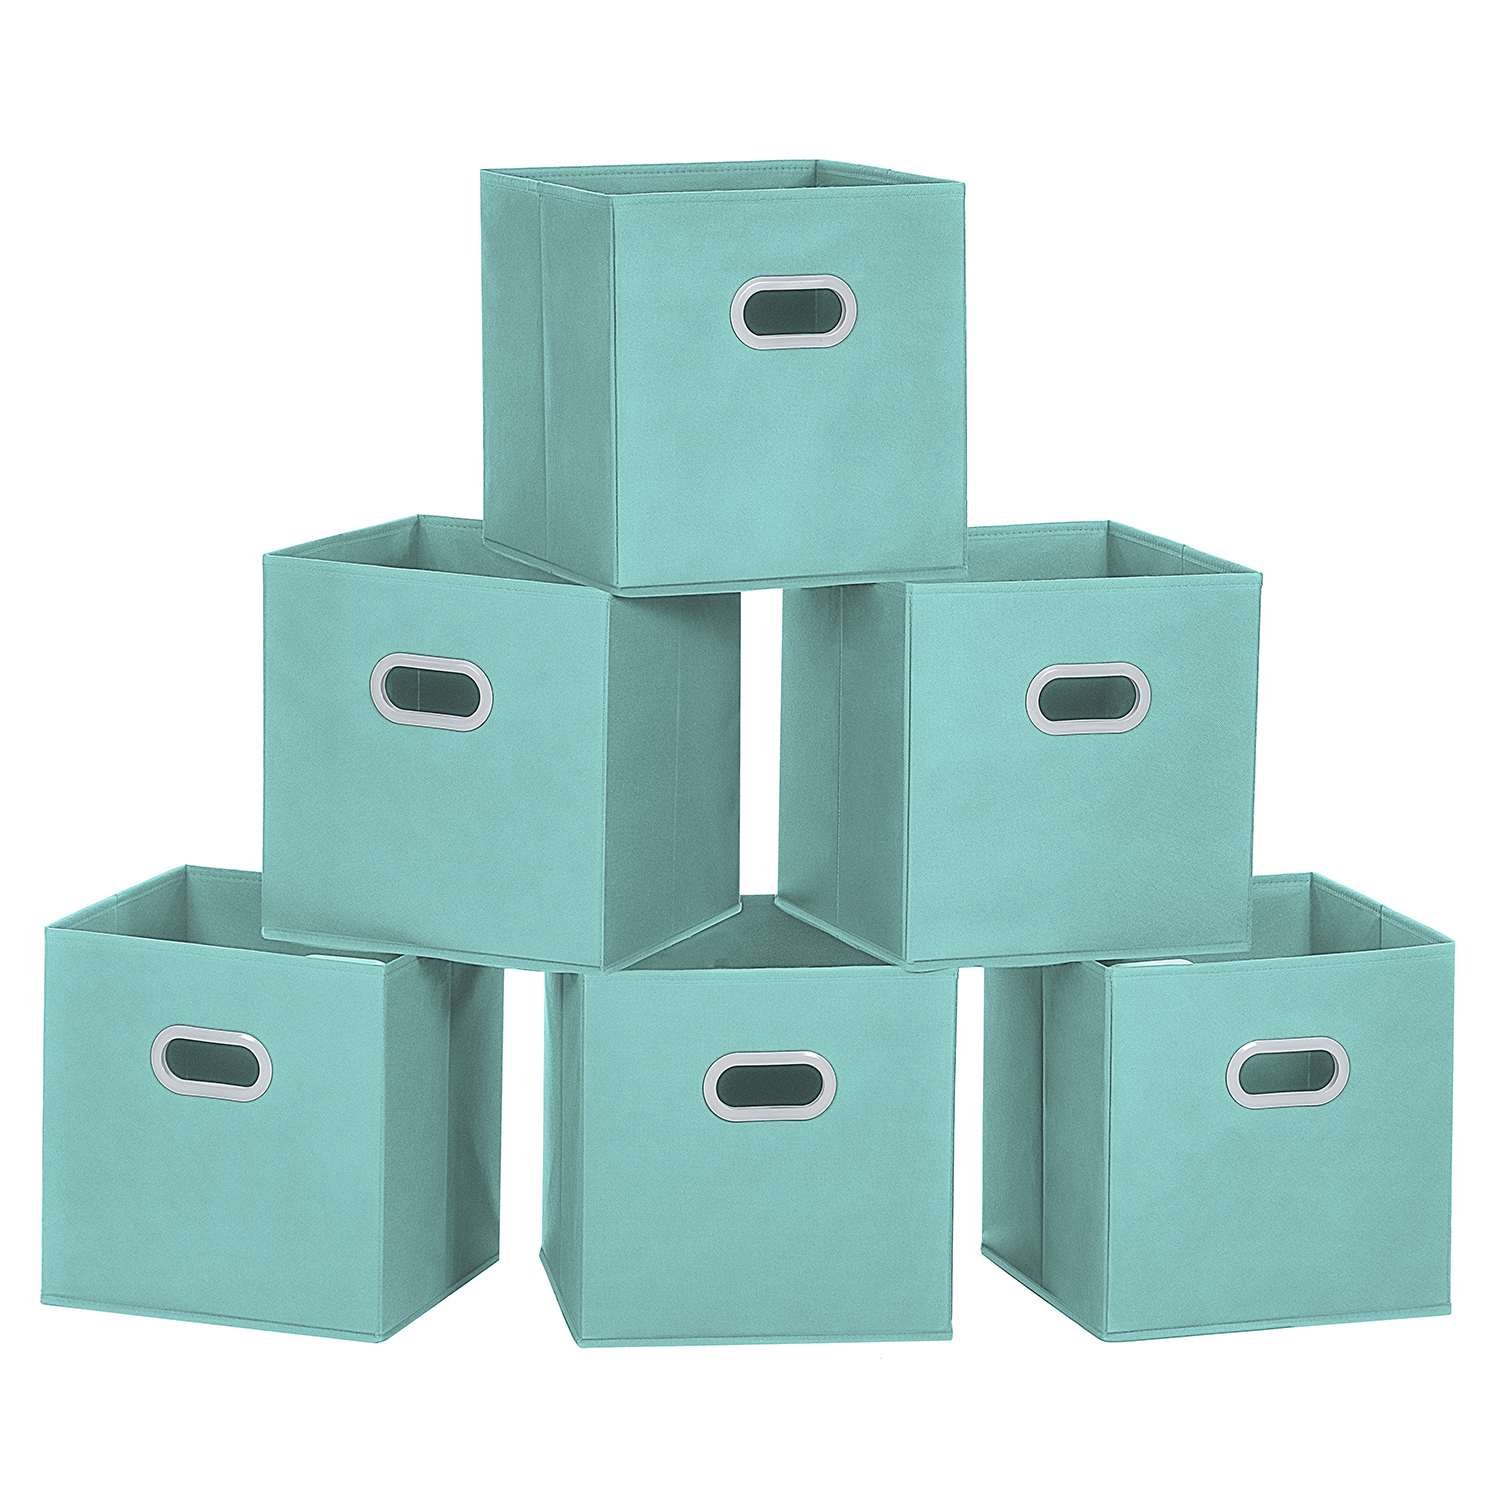 Cloth Storage Bins Maidmax Set Of 6 Nonwoven Foldable Collapsible regarding sizing 1500 X 1500